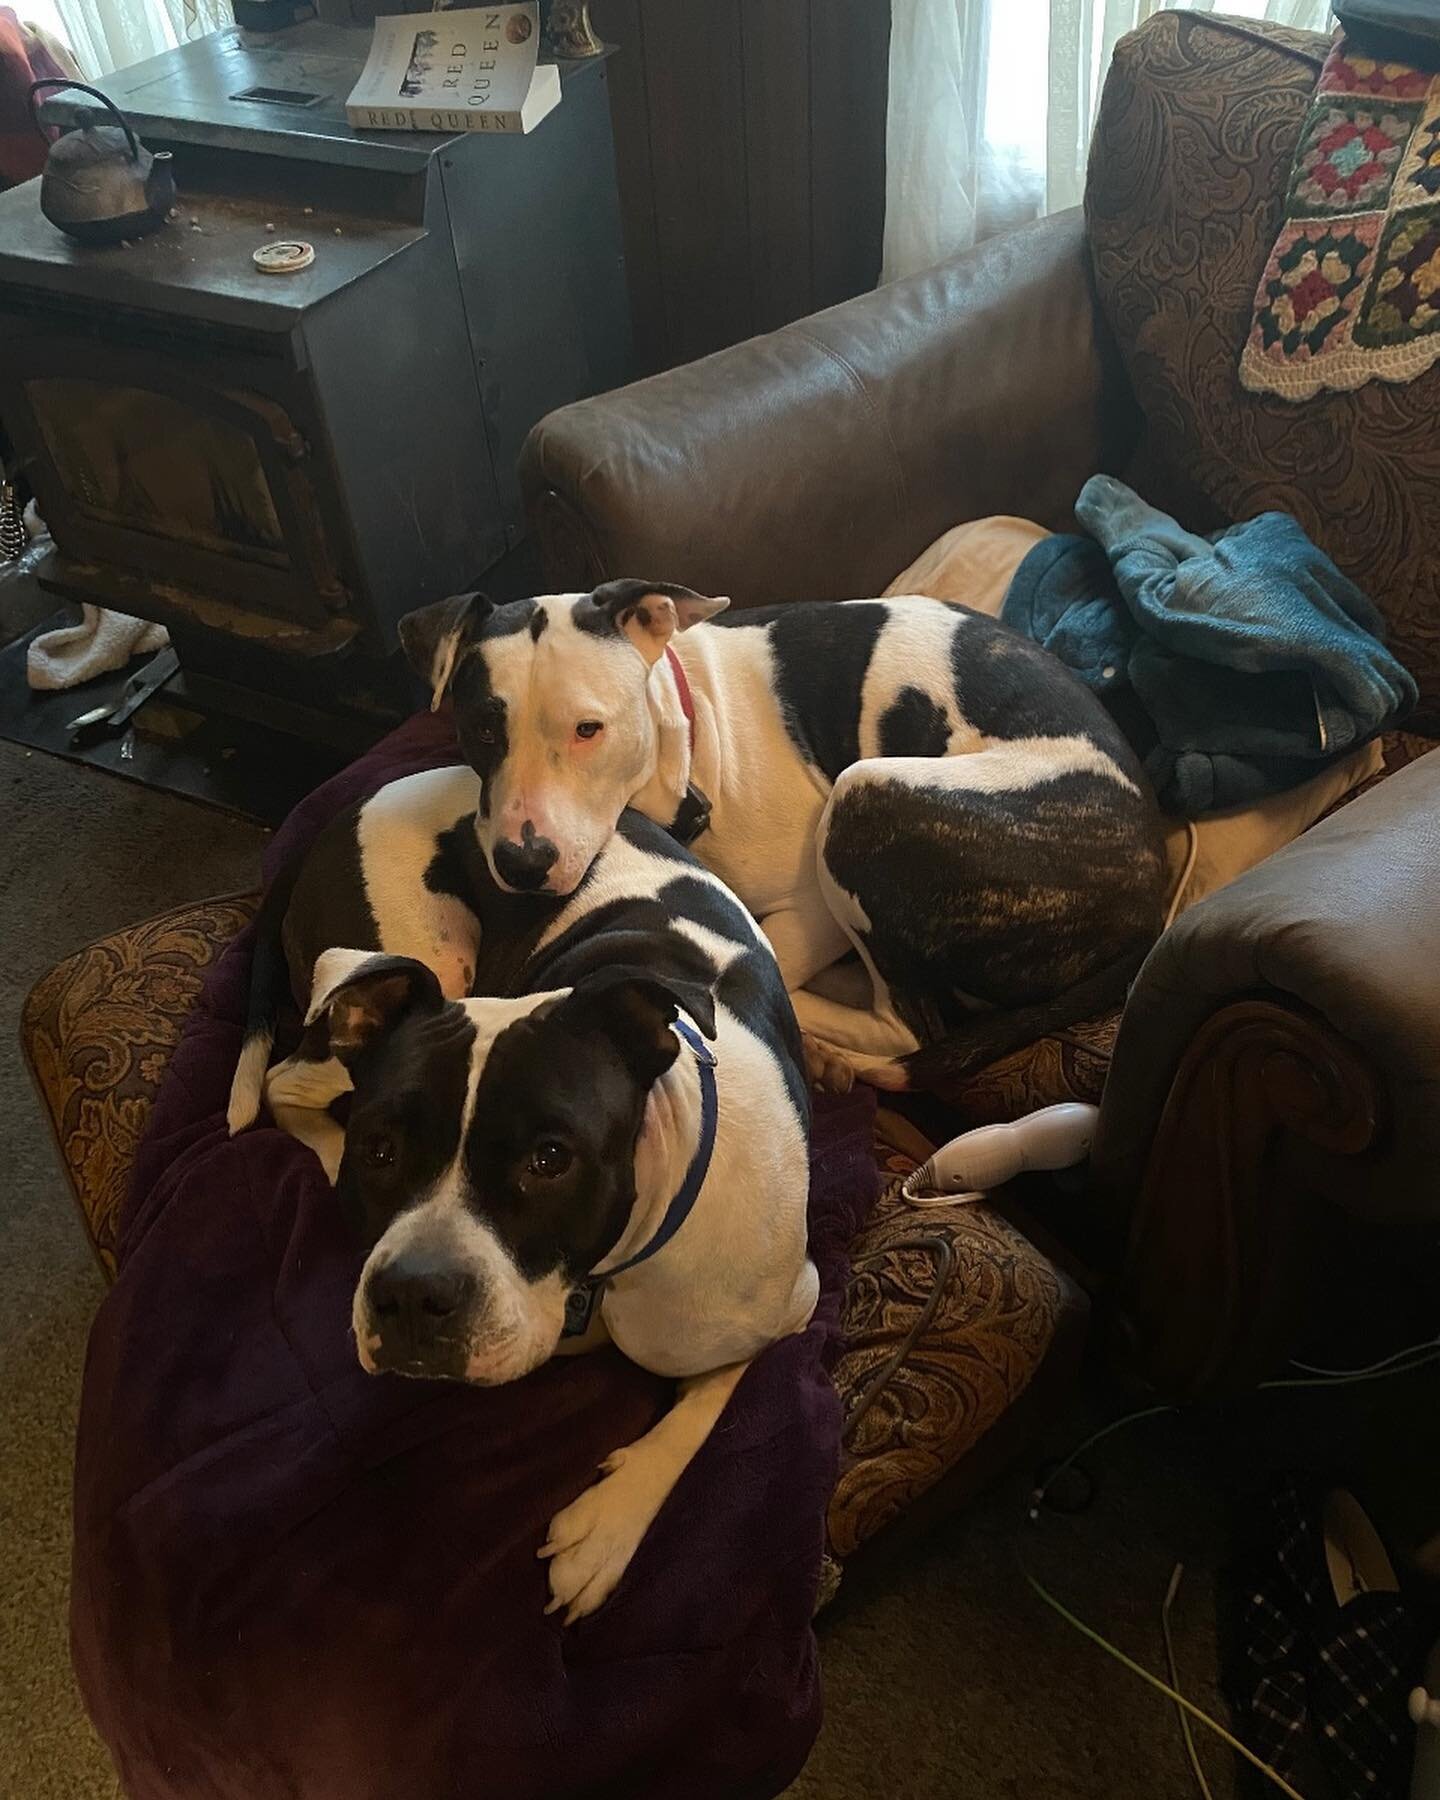 Memphis + Nash both adopted from Big Hair Animal Rescue. Both homeless strays with a million excuses for it not to work. Memphis&rsquo;s pancreas shut down. He requires insulin injections. Adopted at 18 months old his family didn&rsquo;t try to retur